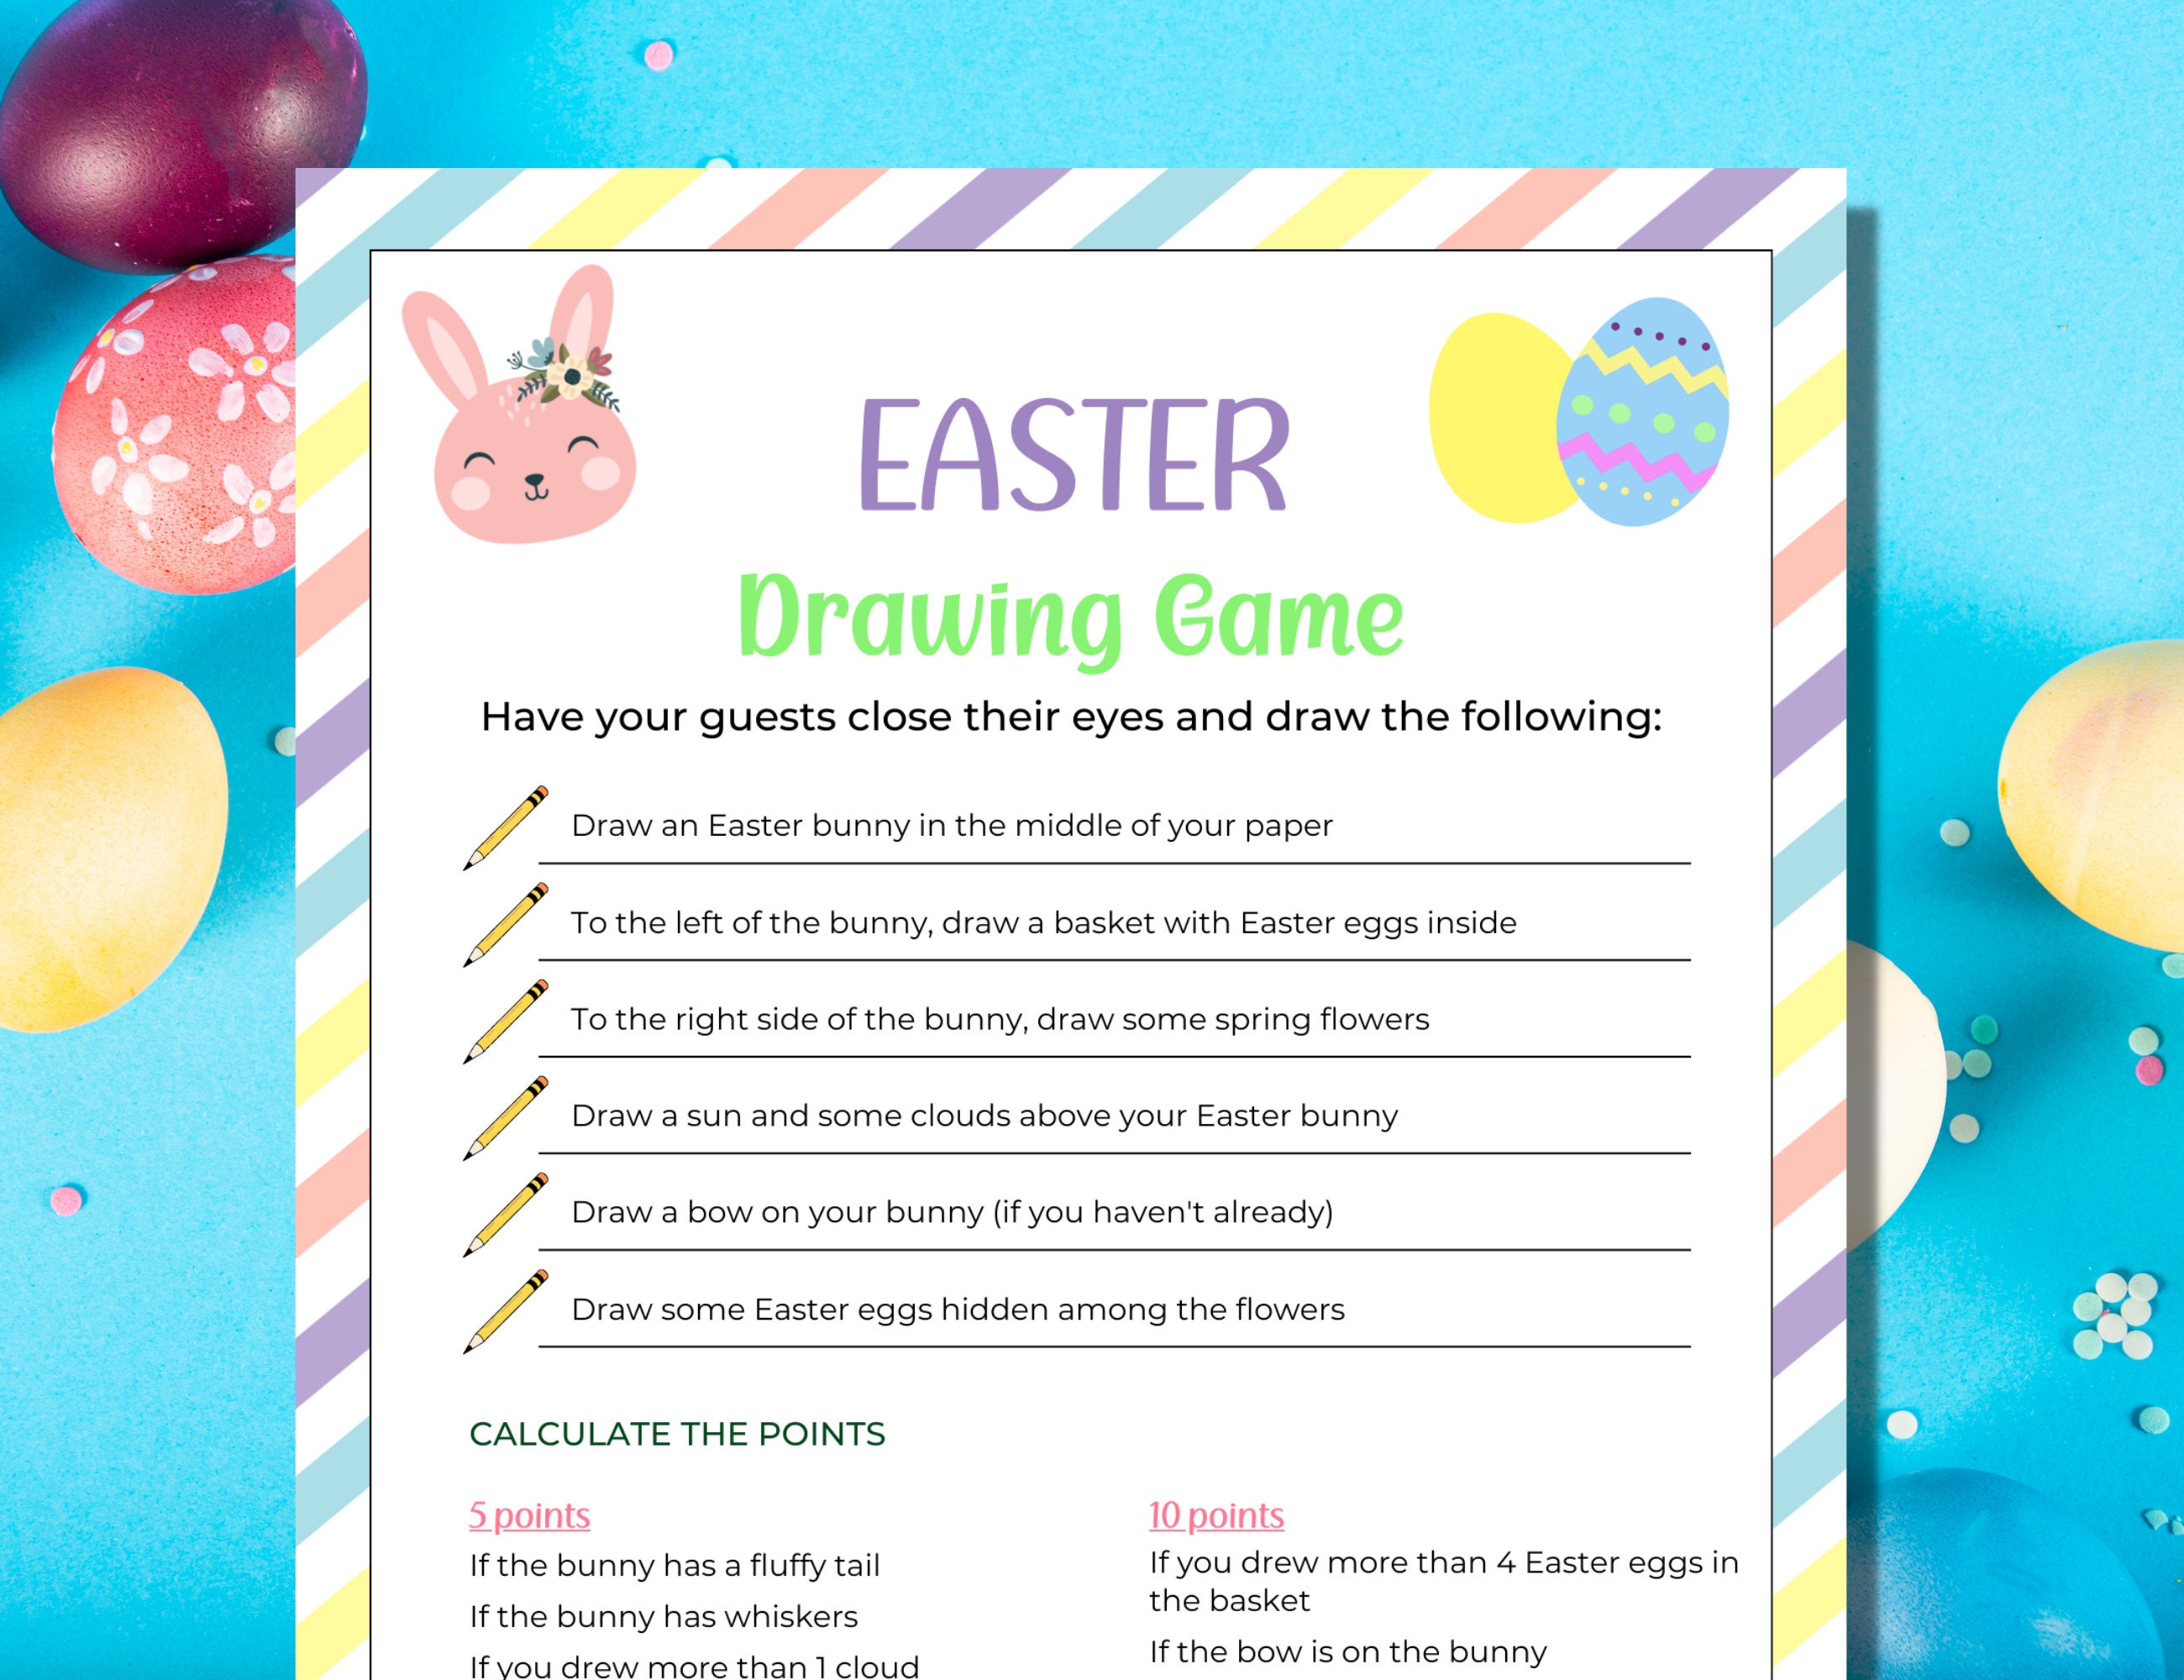 Drawing Games for kids 